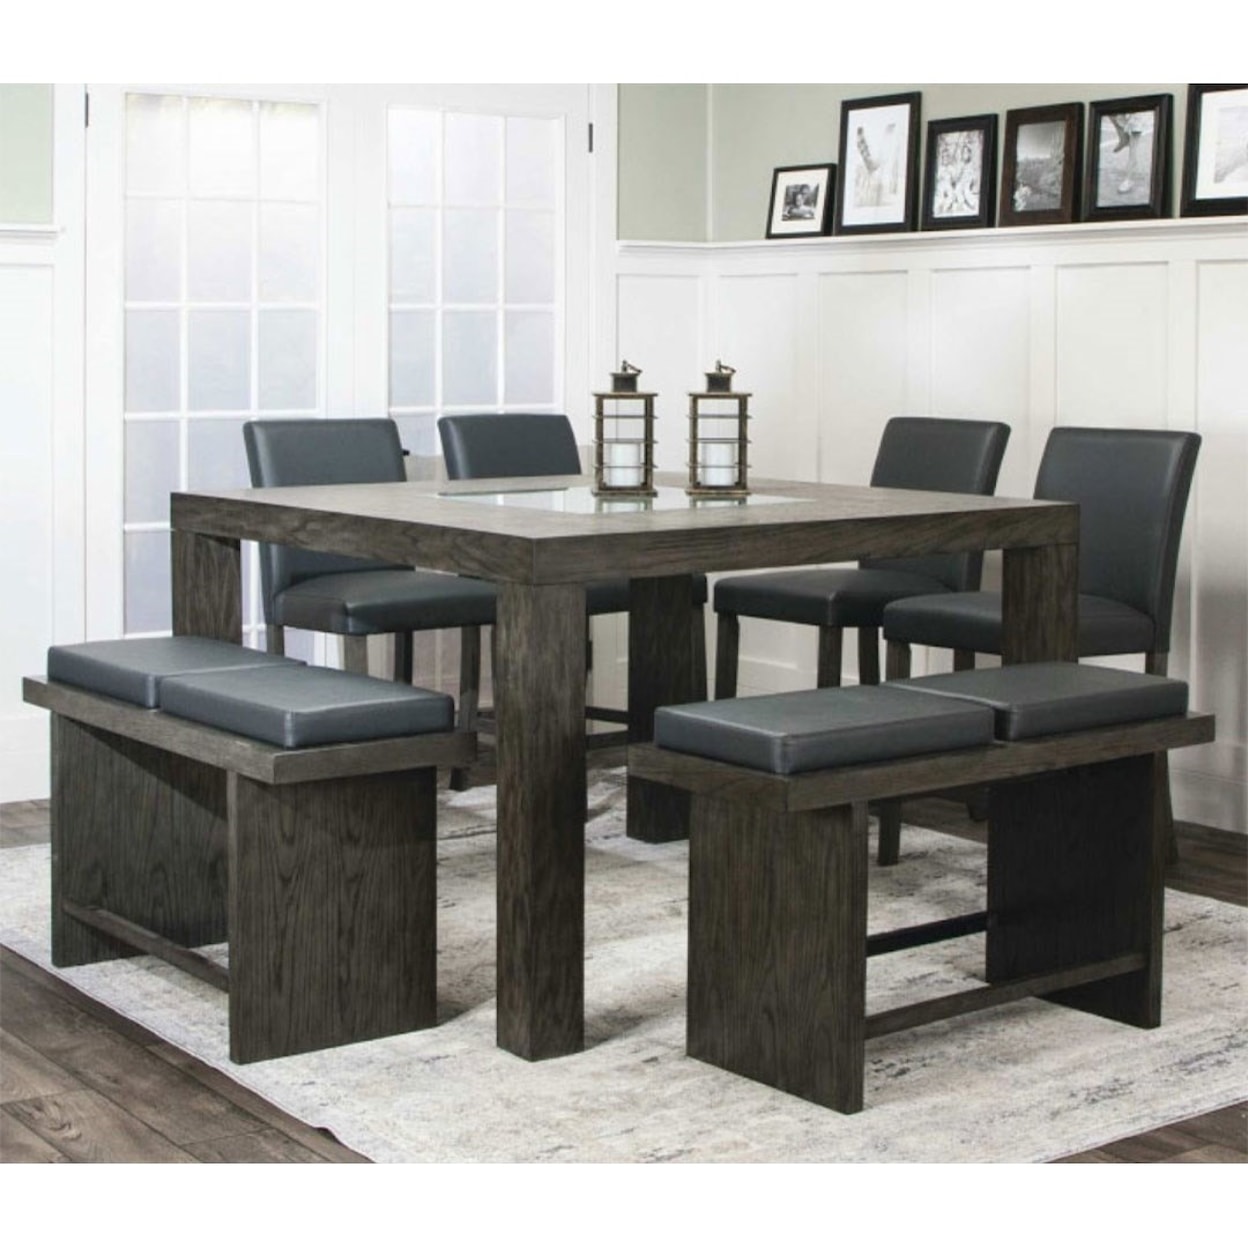 Cramco, Inc Cougar Table and Chair Set